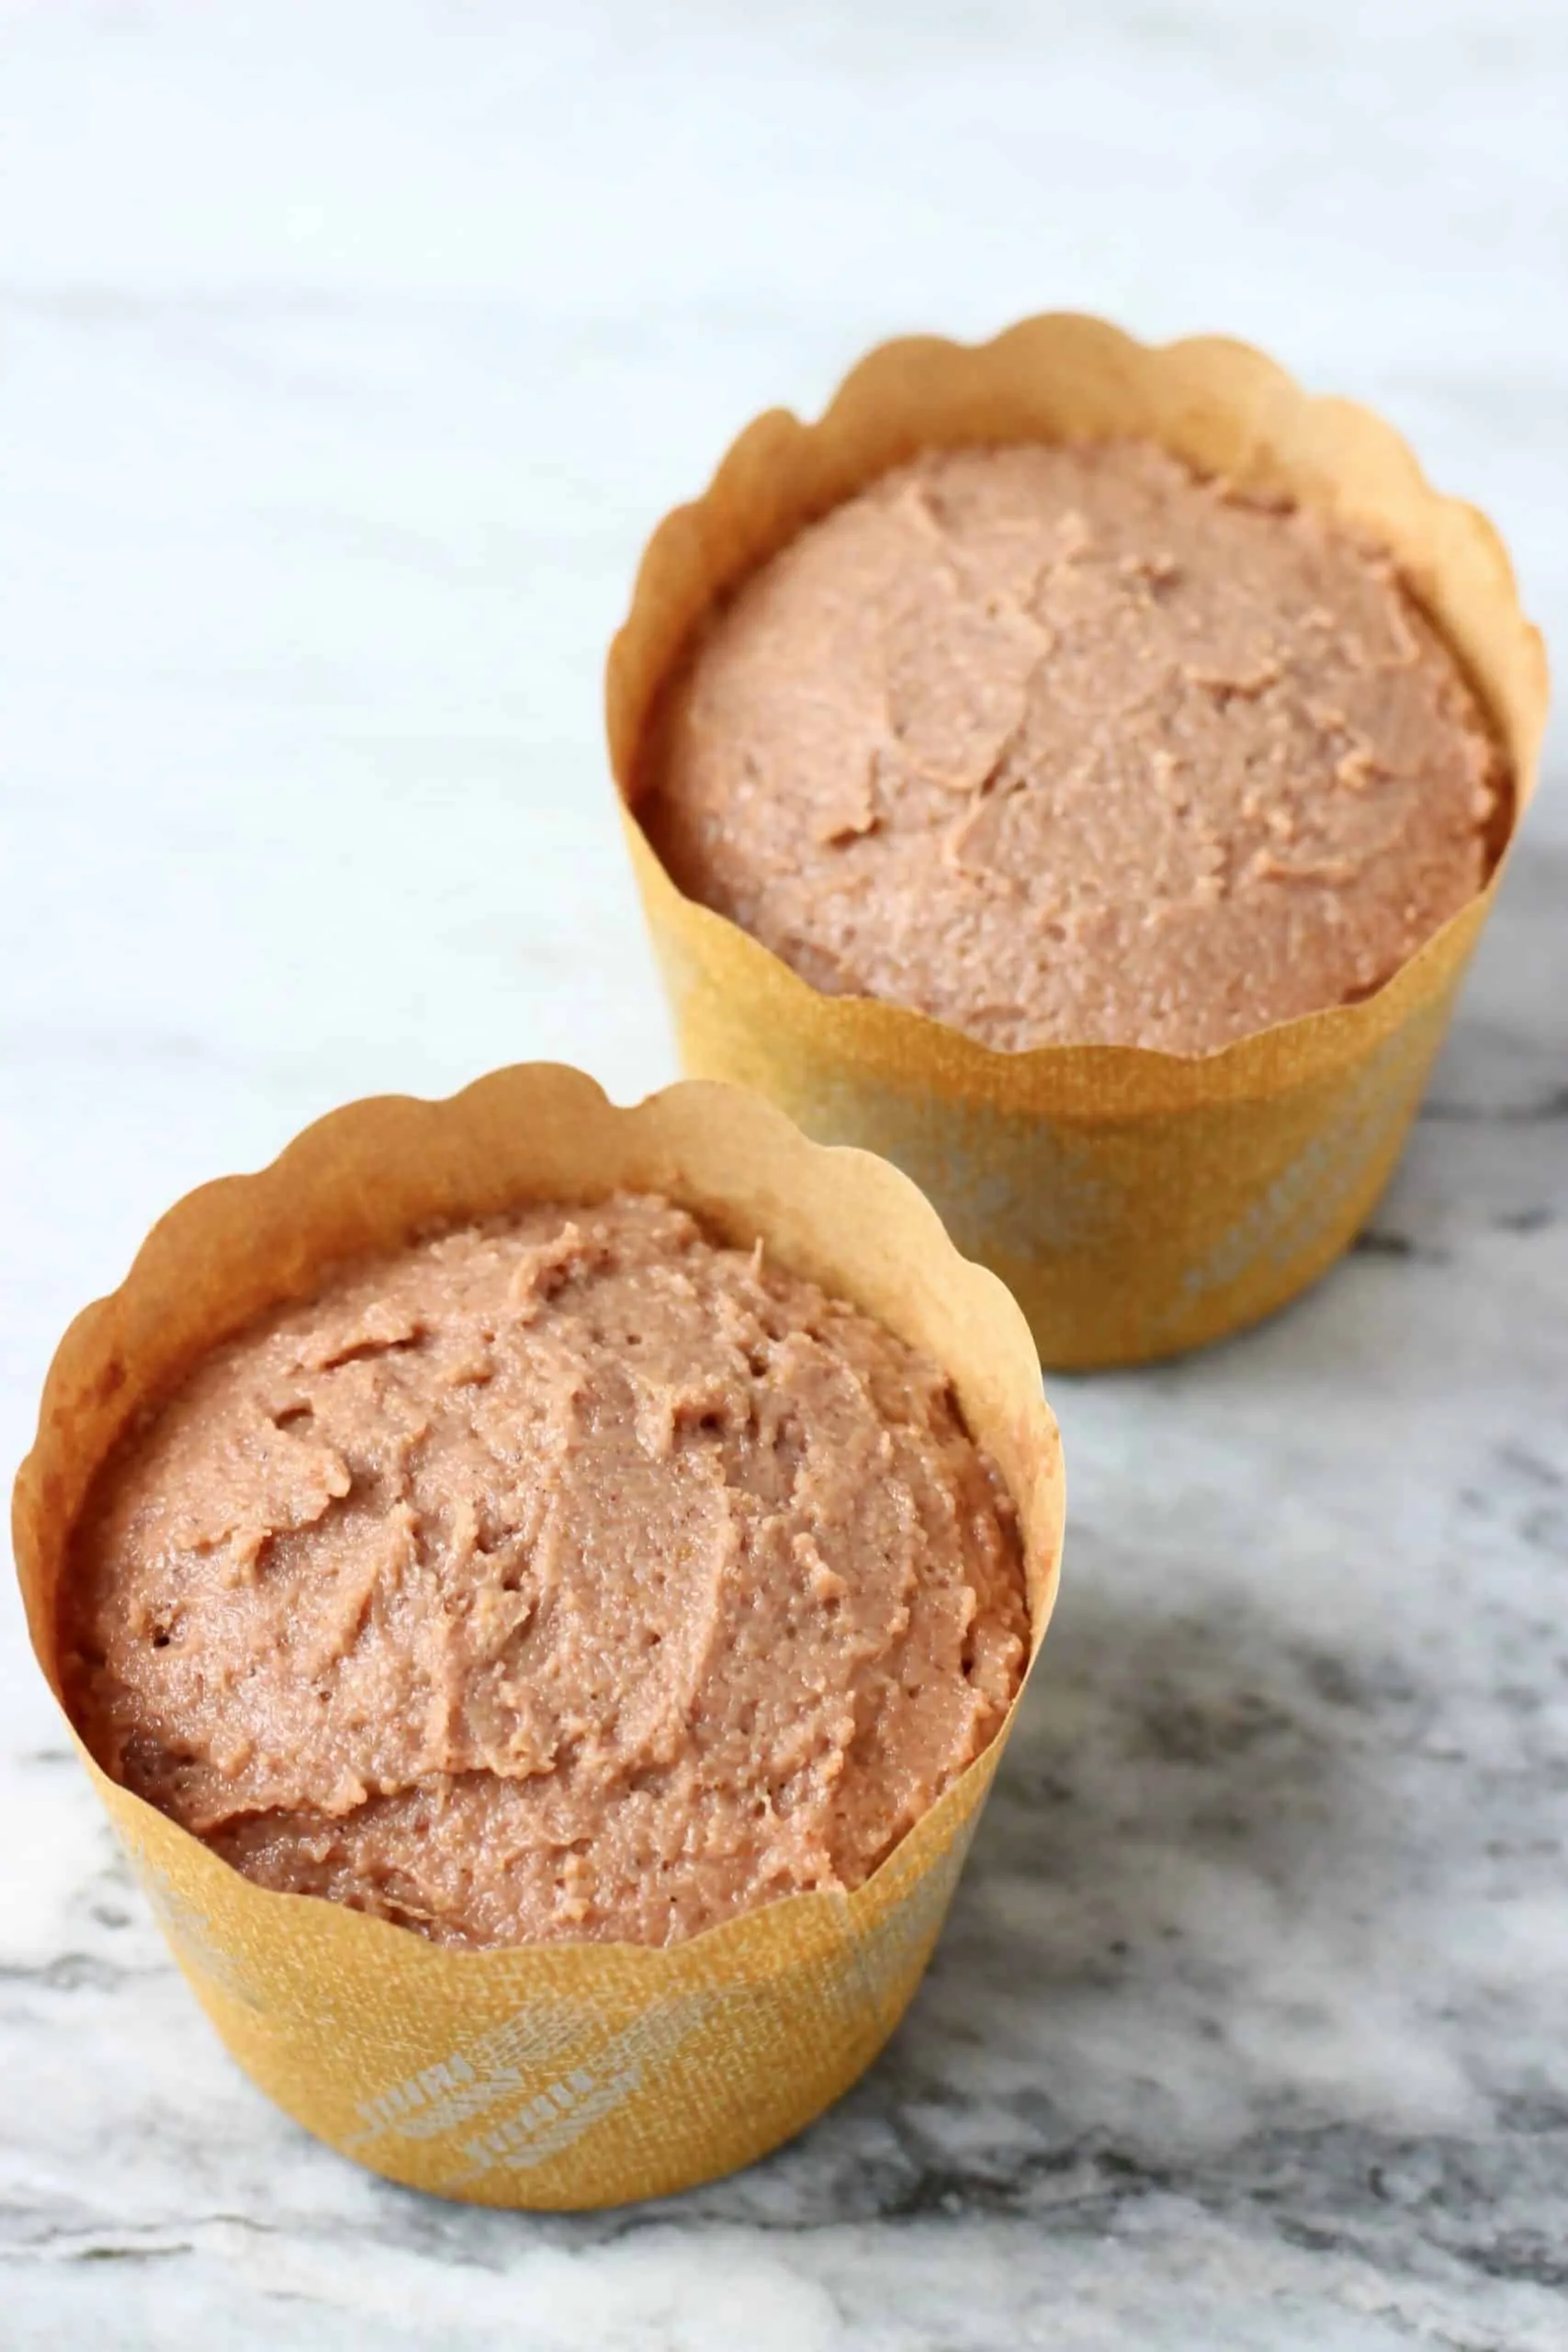 Raw gluten-free vegan gingerbread muffins batter in two brown muffin cases